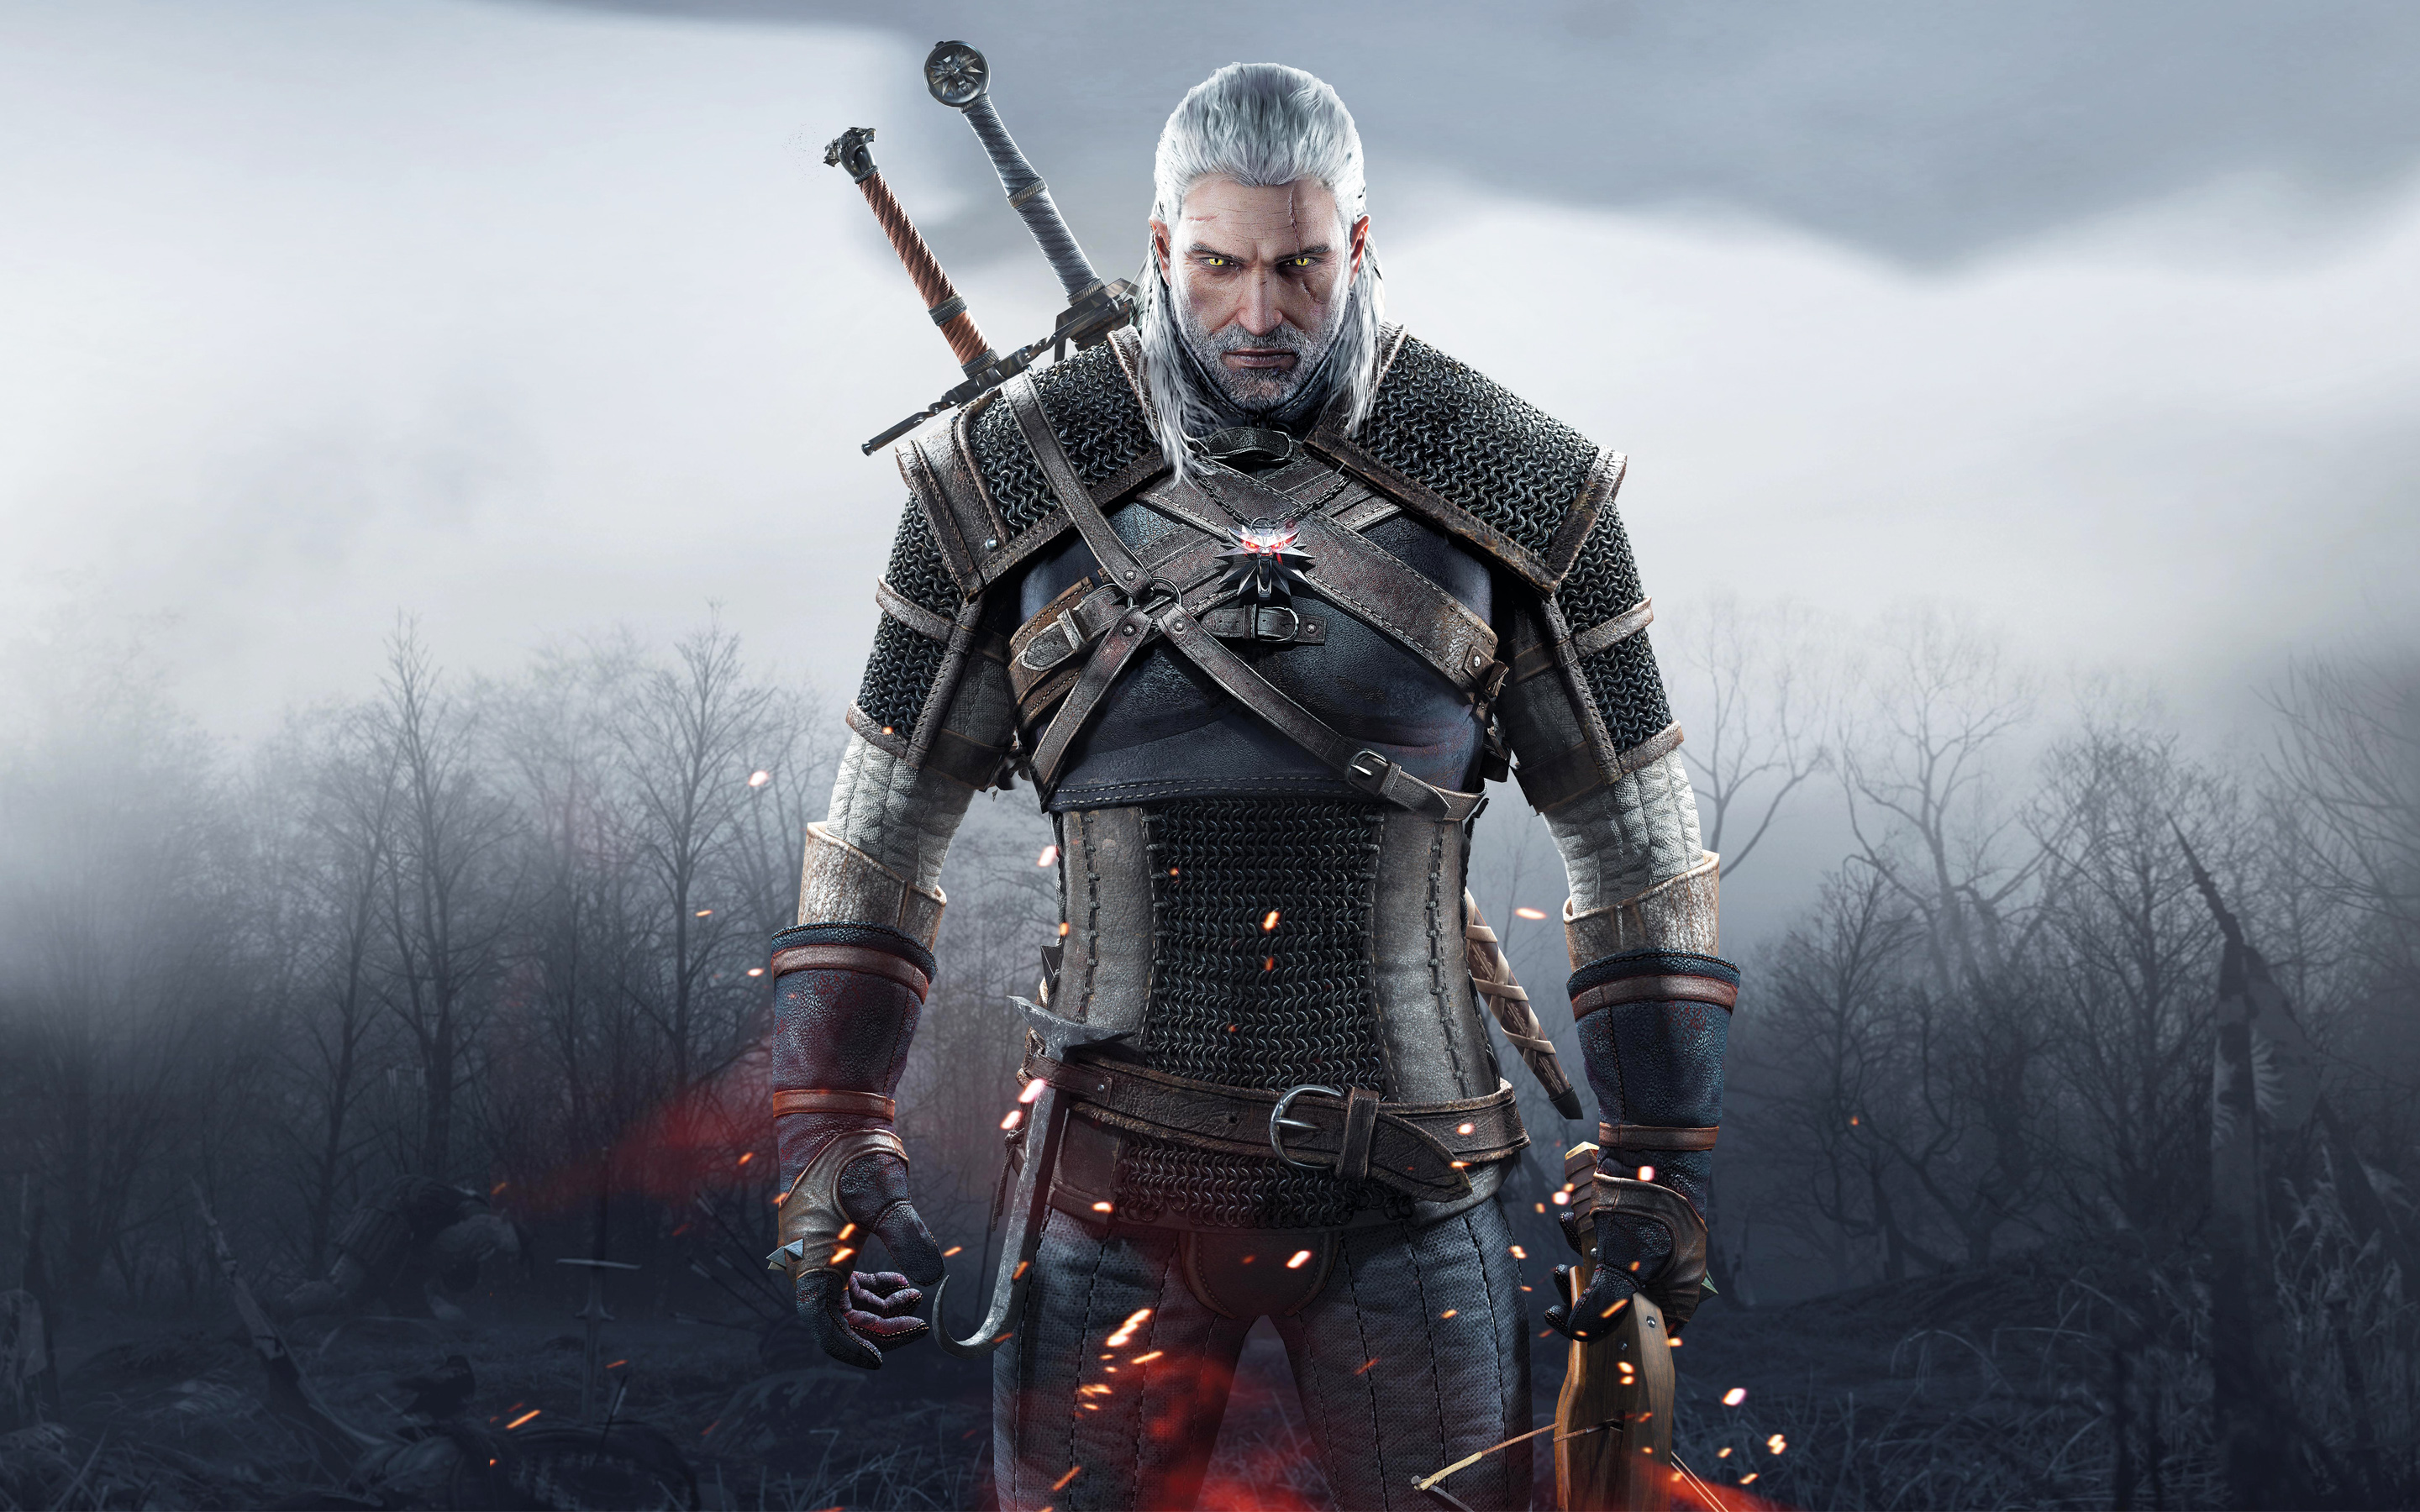 Netflix showrunner to excited Witcher fans: never mind the leaks